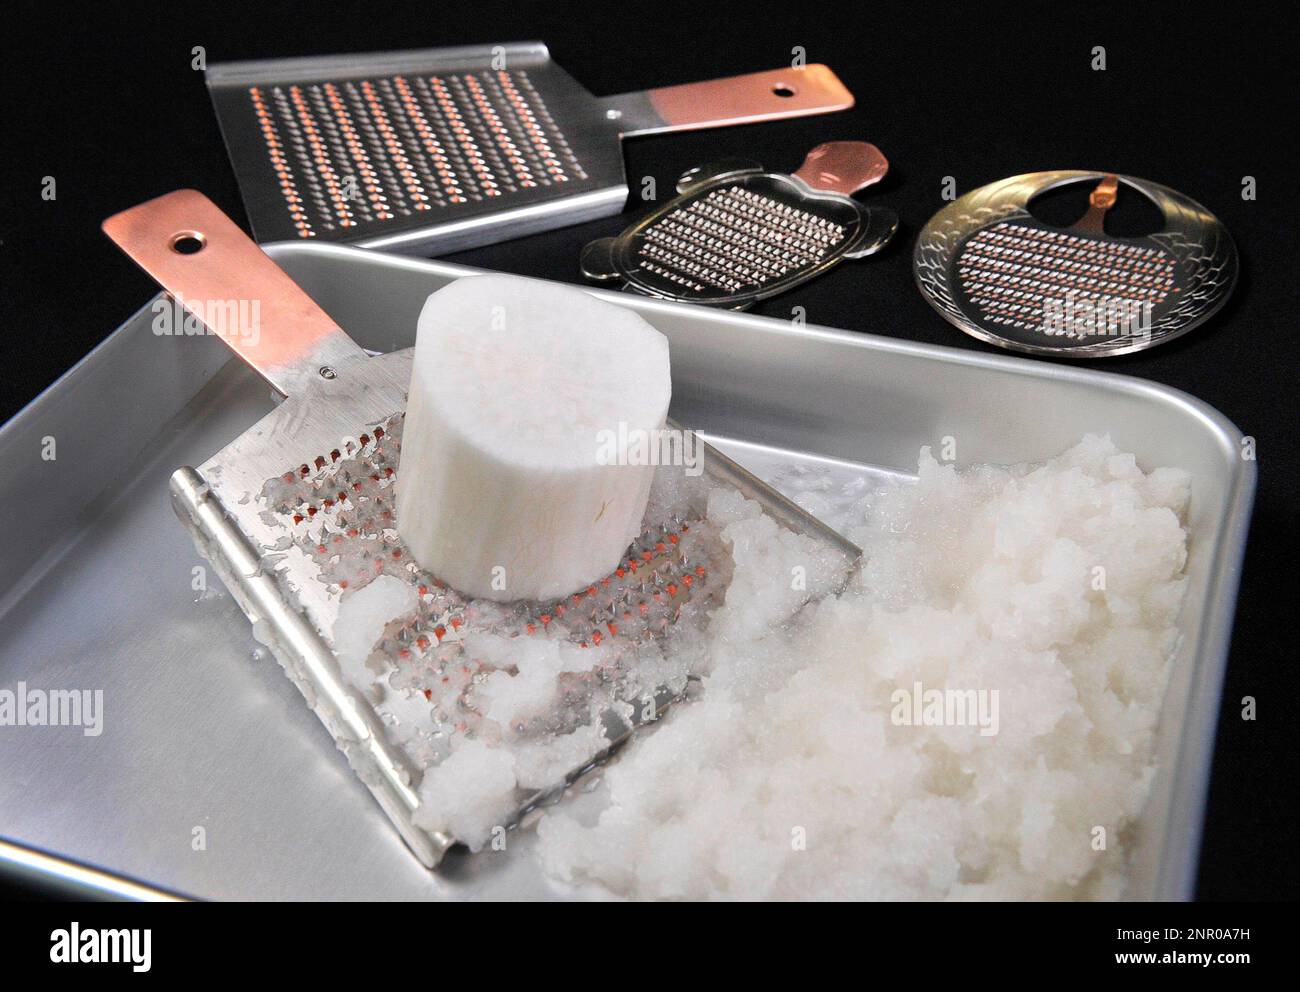 https://c8.alamy.com/comp/2NR0A7H/a-picture-shows-japanese-grater-oroshigane-and-grated-japanese-radish-daikon-oroshi-in-tokyo-on-may-29-2020-the-trapezoidal-grater-is-the-traditional-japanese-grater-the-yomiuri-shimbun-via-ap-images-2NR0A7H.jpg